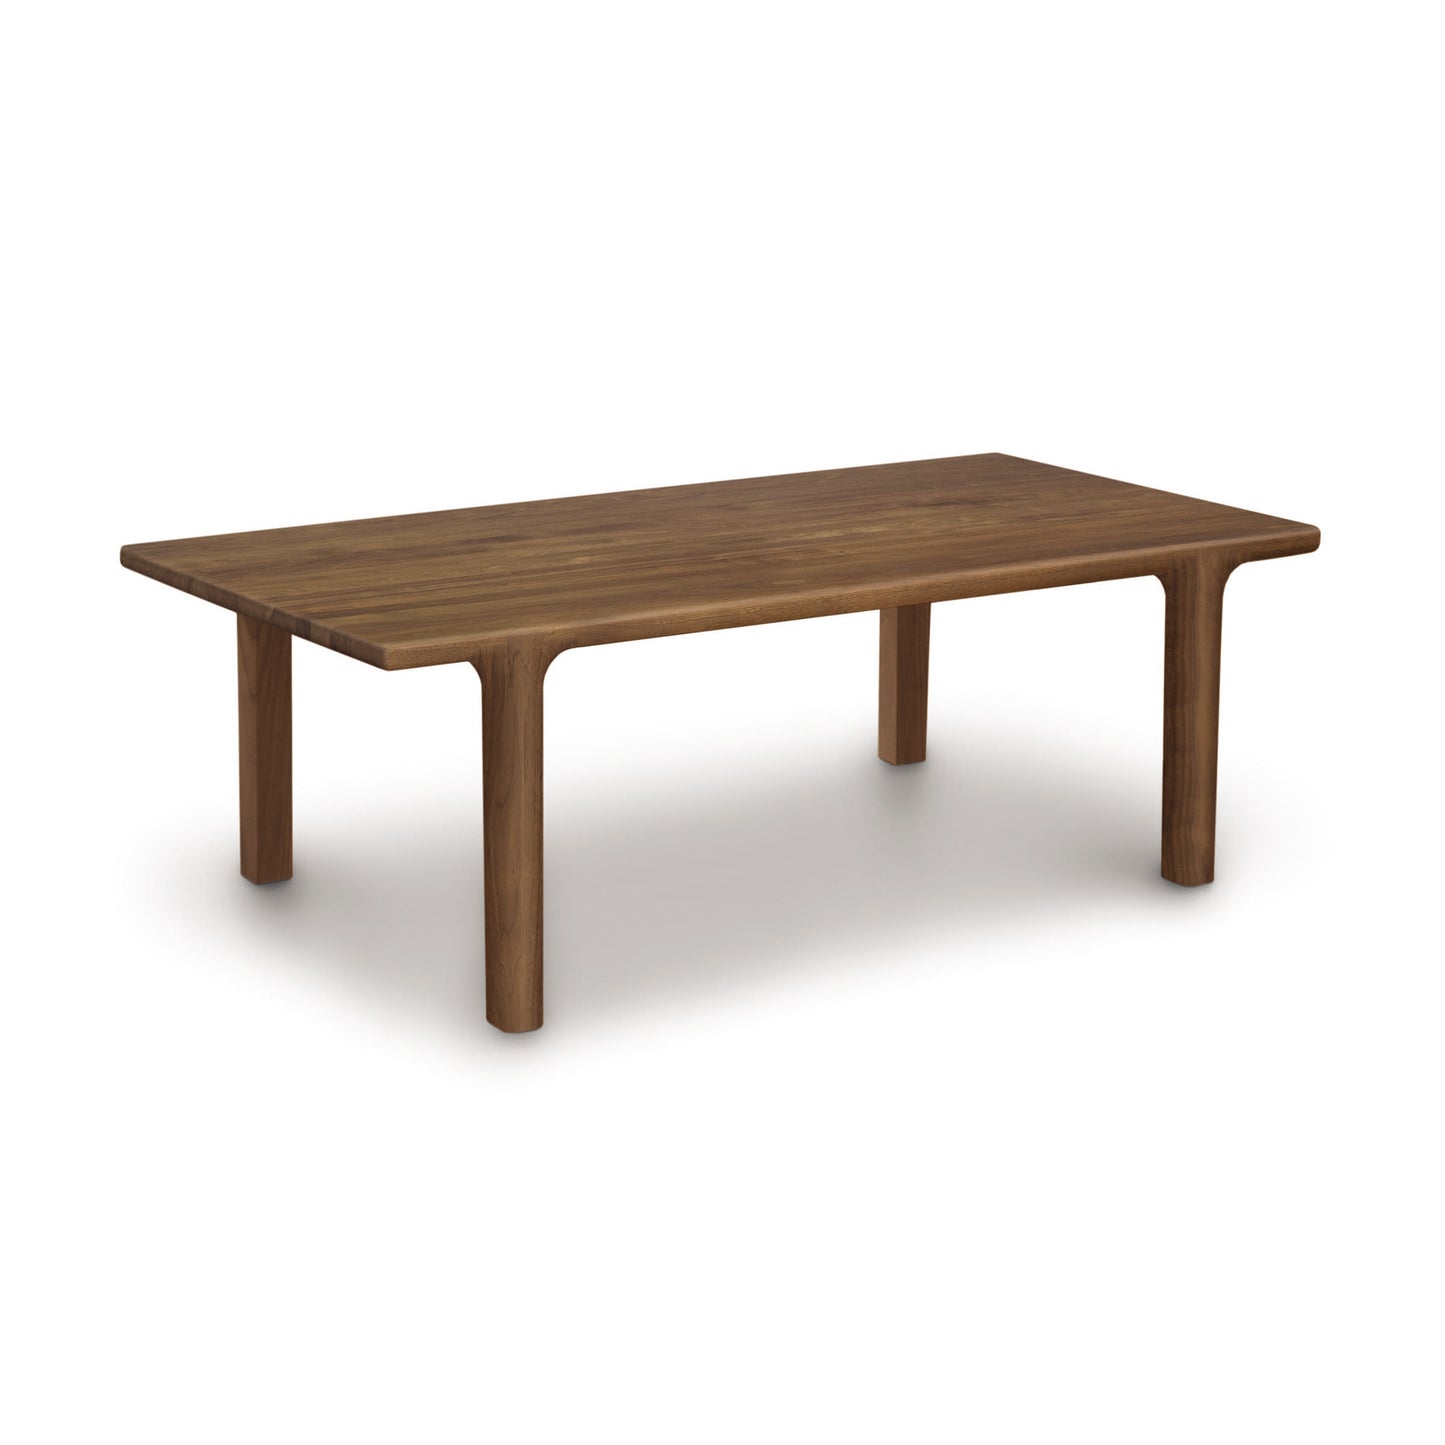 A contemporary design Copeland Furniture Sierra Rectangular Coffee Table crafted from North American hardwood with four legs on a plain background.